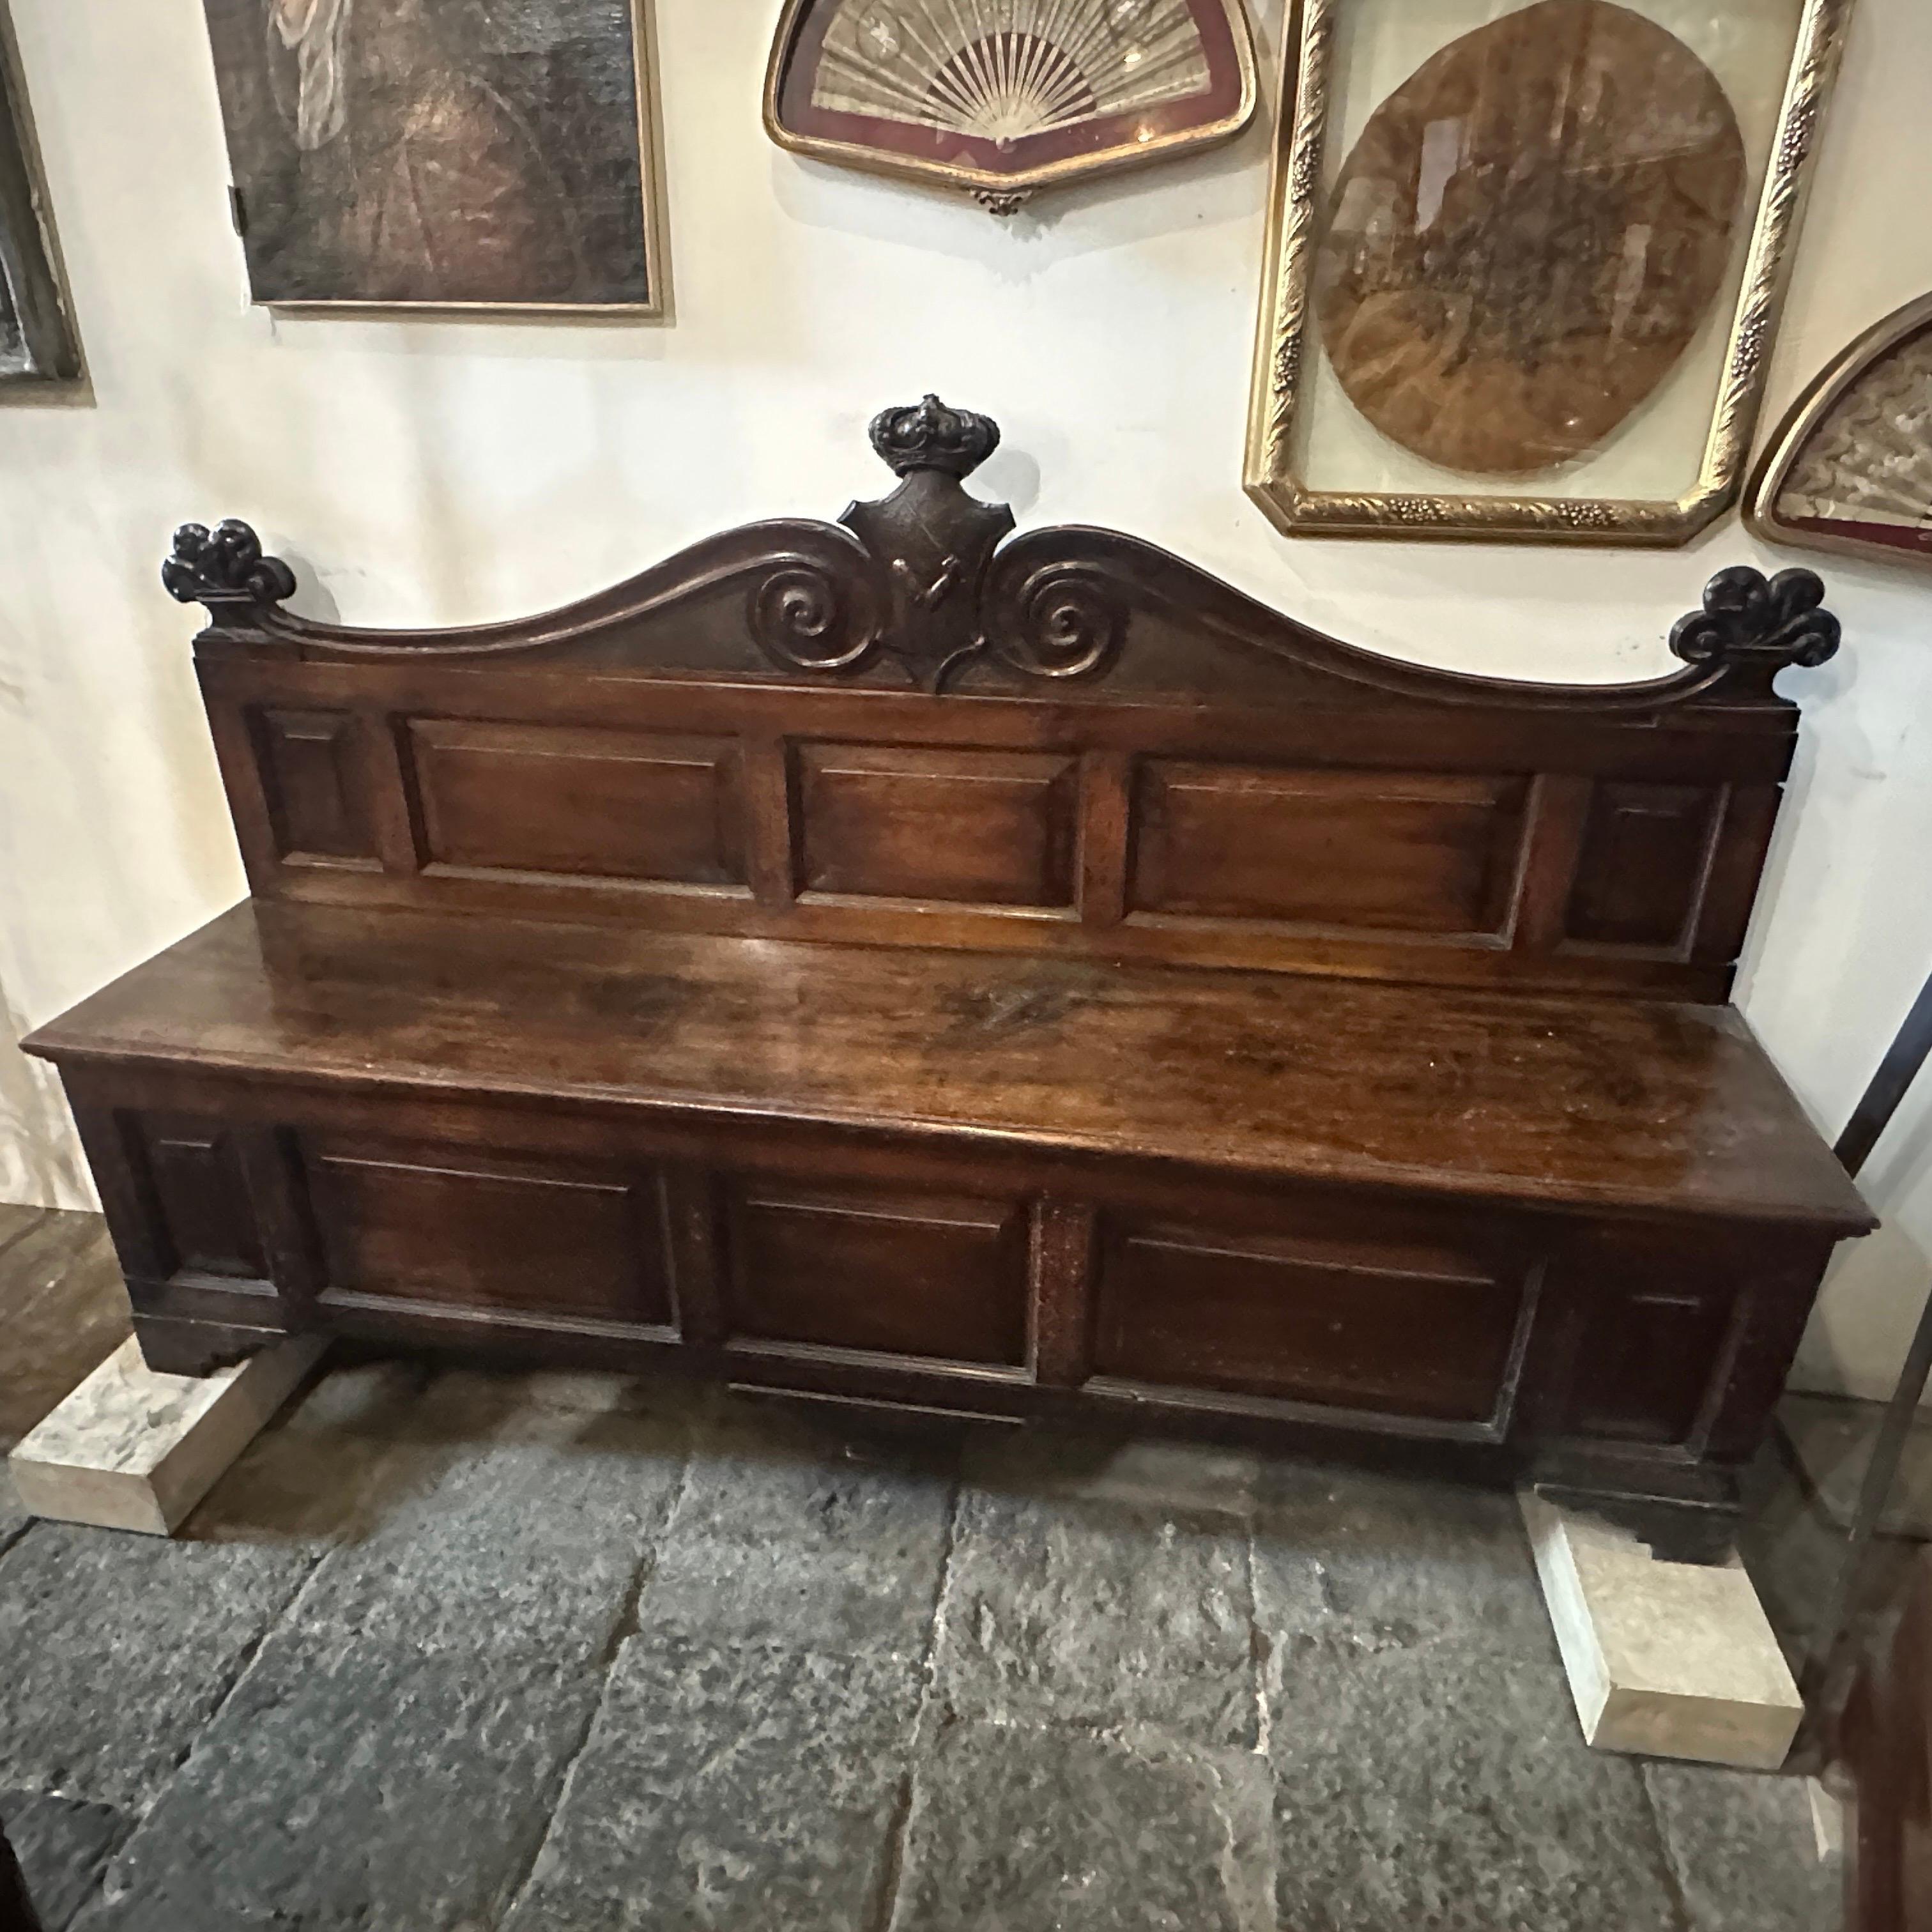 A unique walnut wood bench that belonged to the noble Sicilian Spatafora family. It' is a piece of furniture that reflects the design characteristics of the Louis Philippe style, which was prominent in the mid-19th century, particularly during the